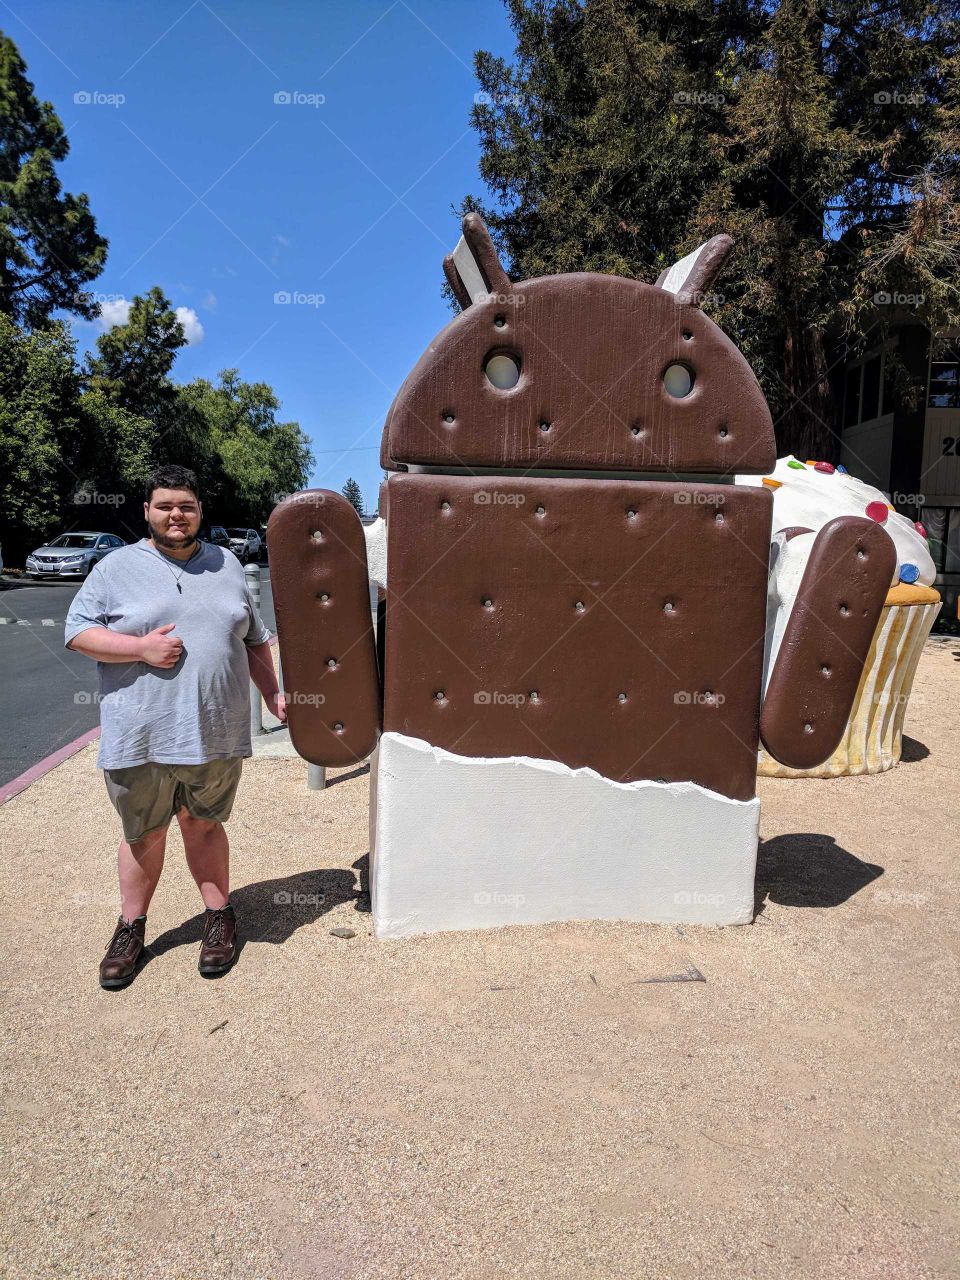 At the Googleplex, standing near an Android update, Ice cream sandwich.